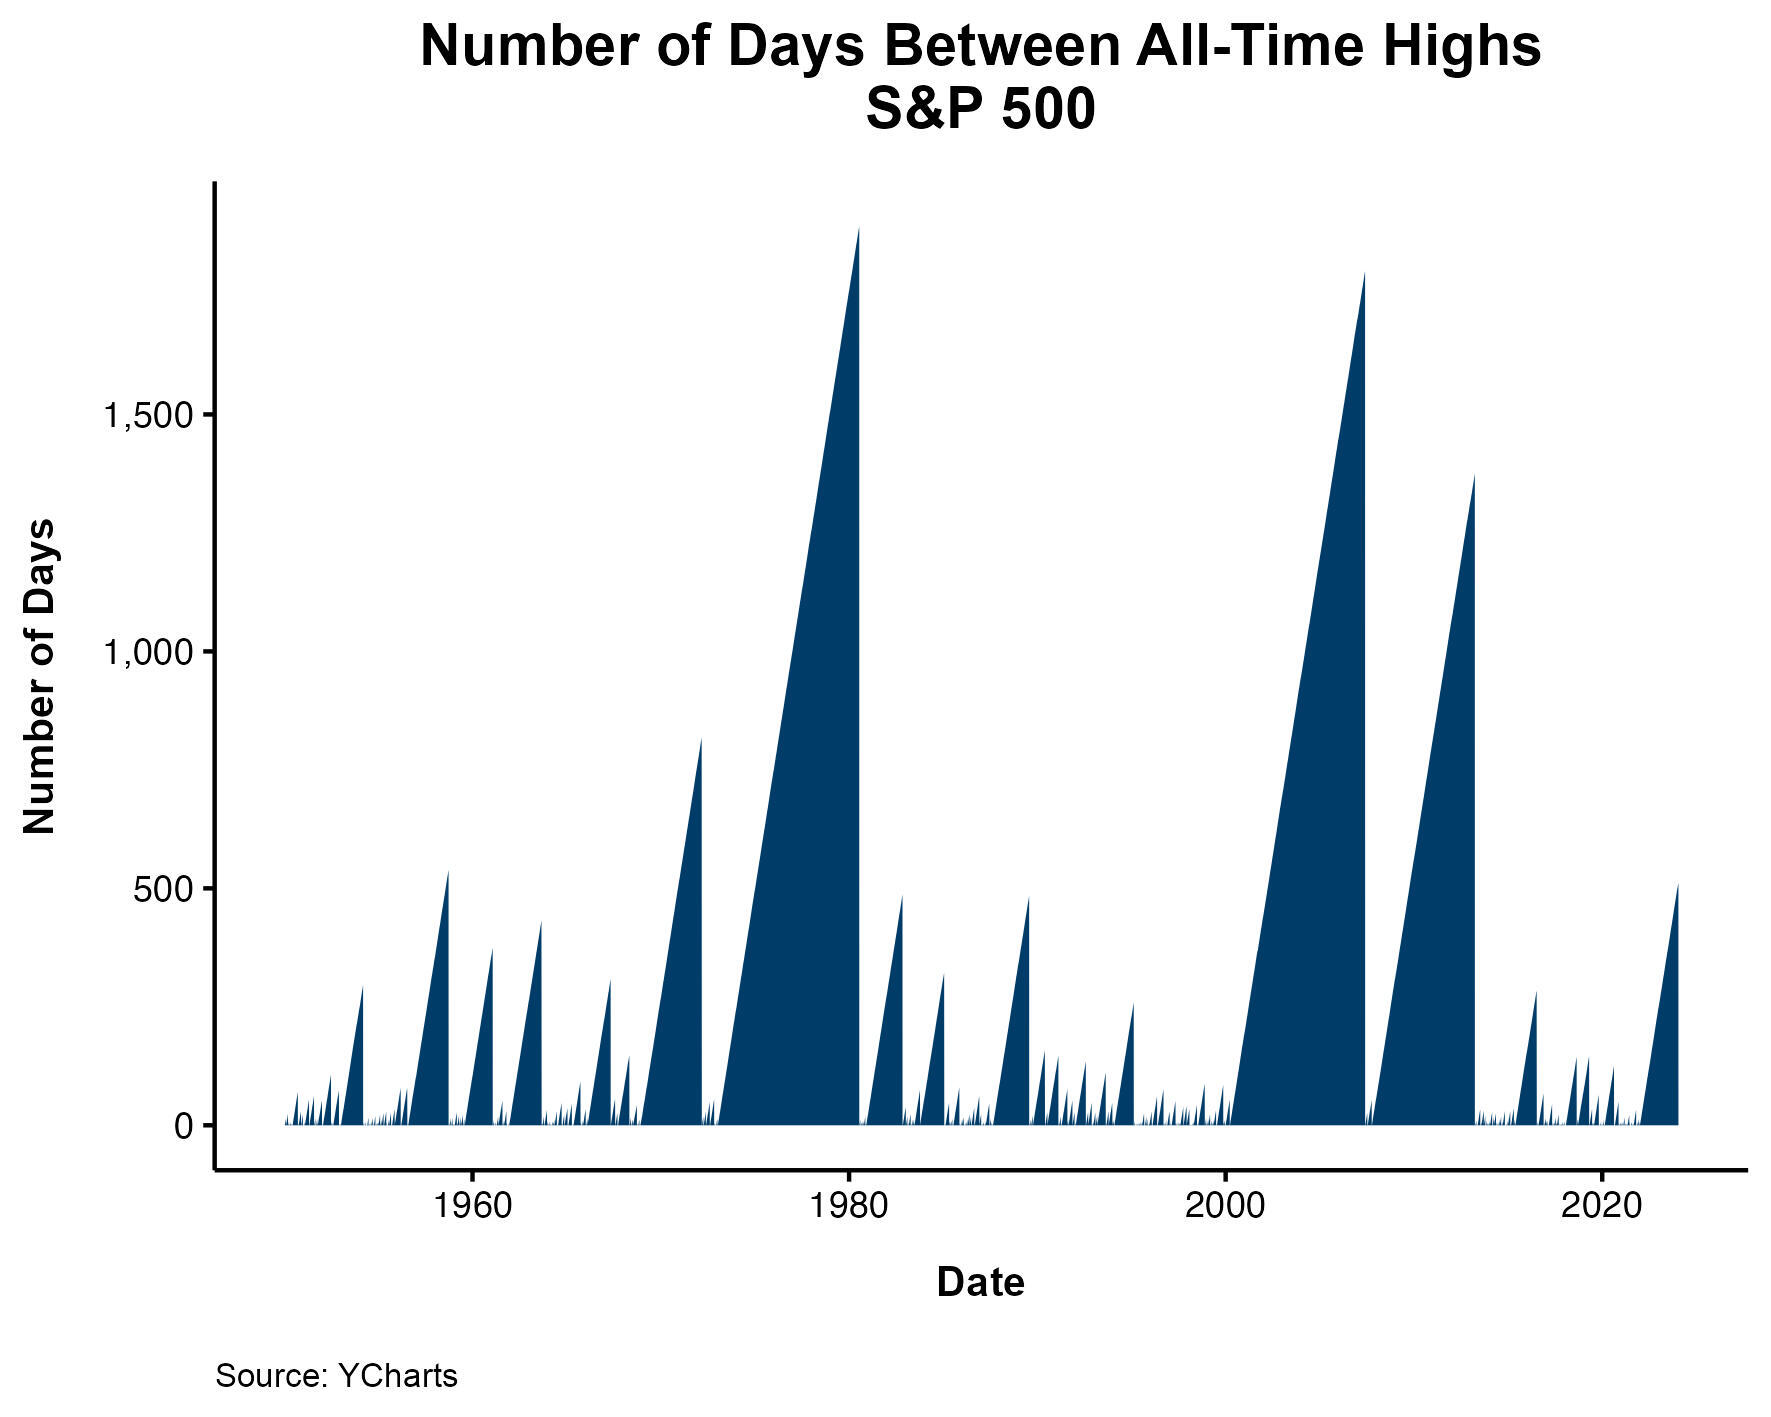 Number of Days Between Record Highs in the S&P 500